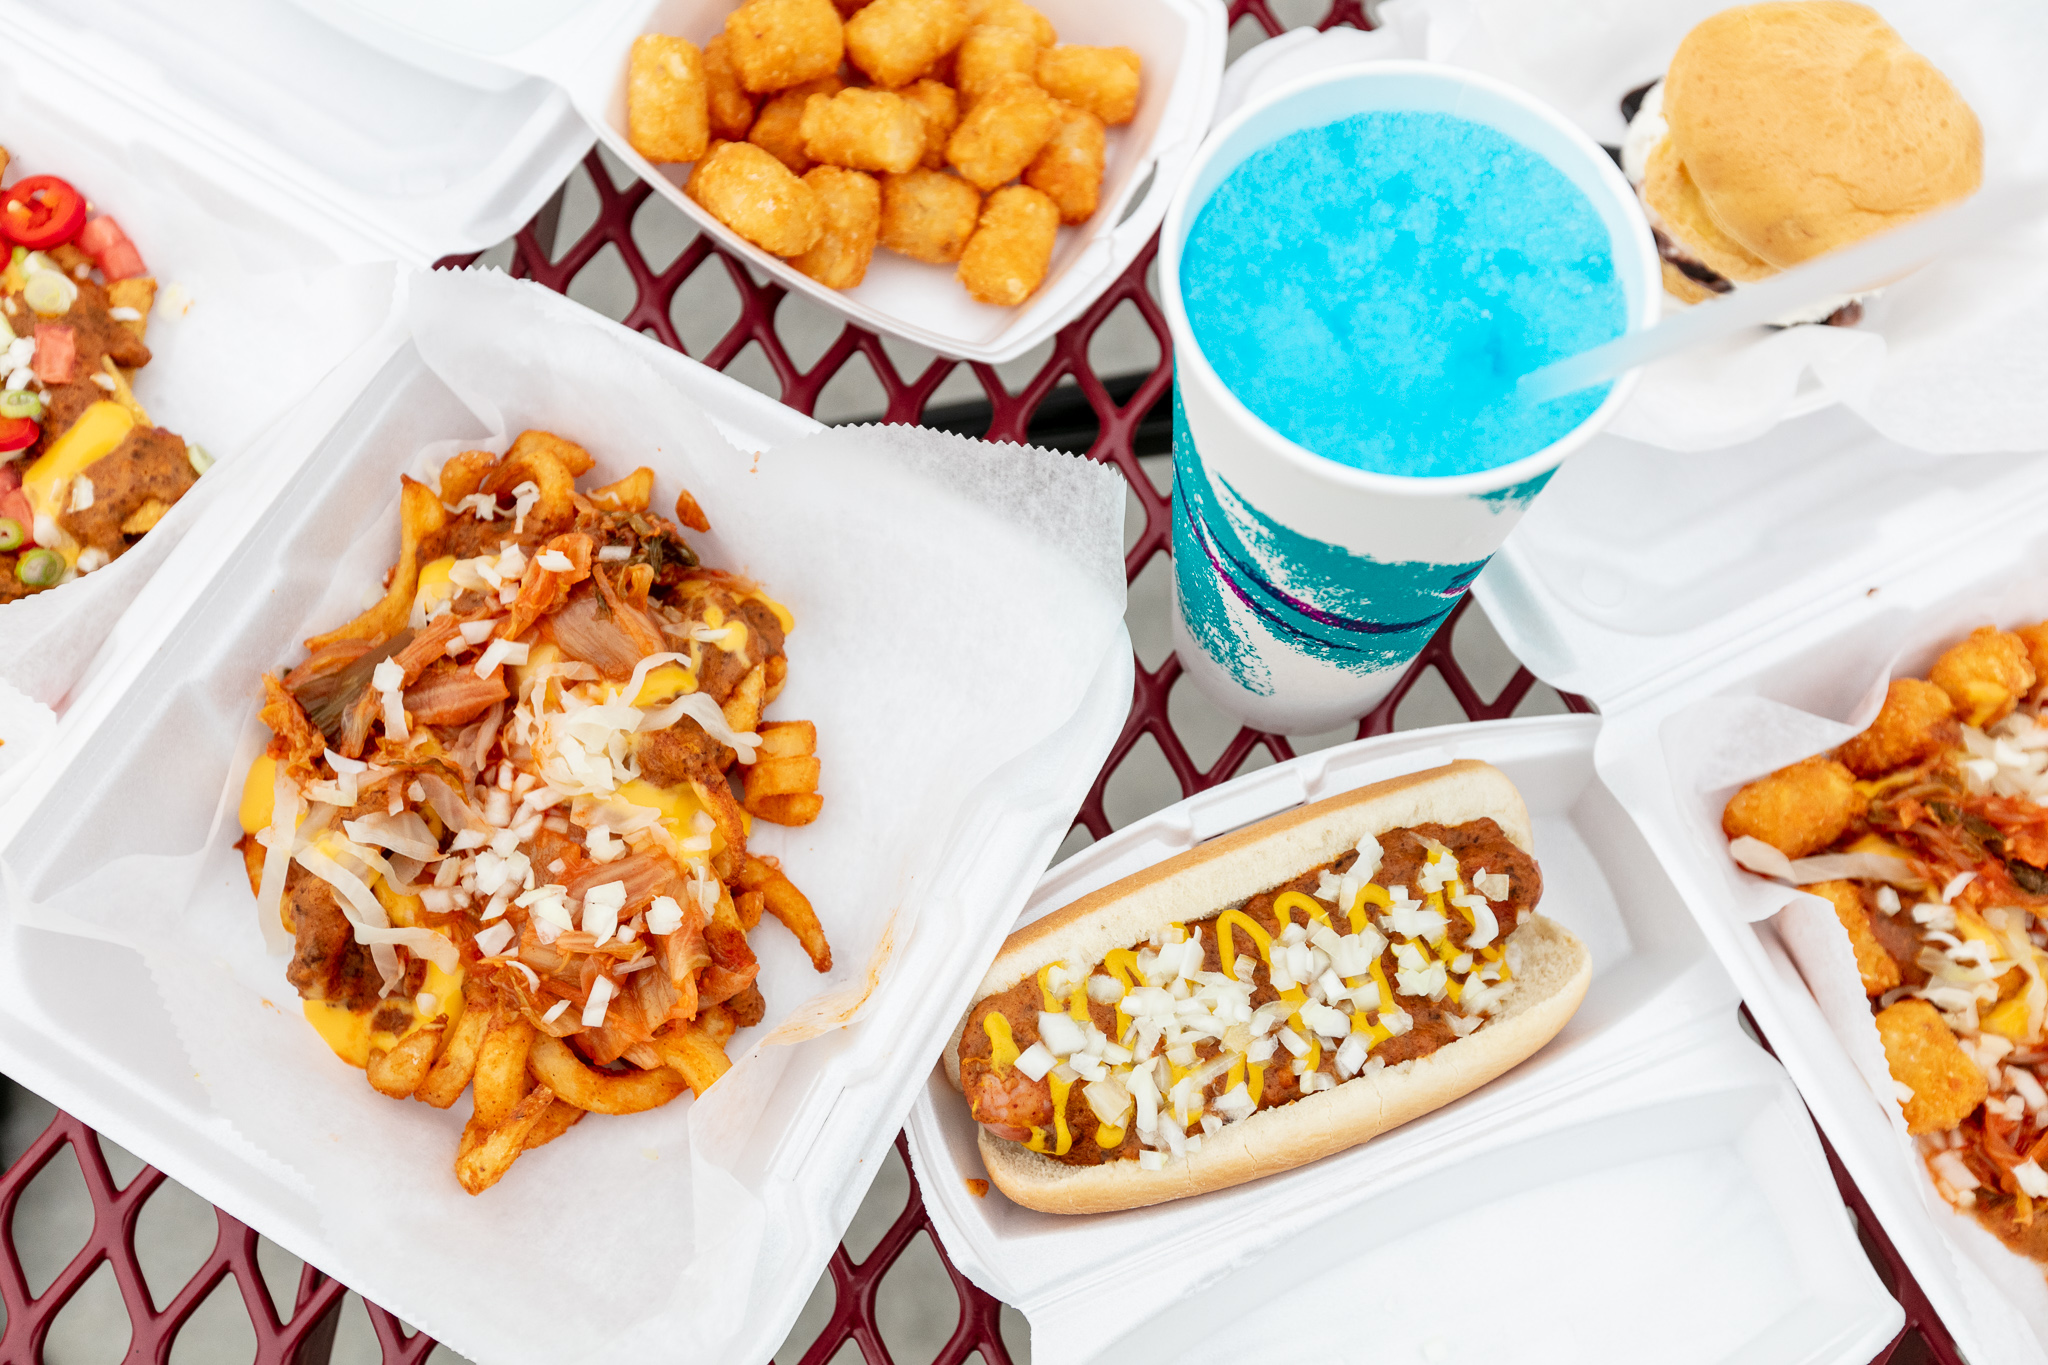 tater tots, a coney dog, curly fries covered in kimchi and onions, a cream puff, and a ‘90s-style paper cup with a blue drink inside